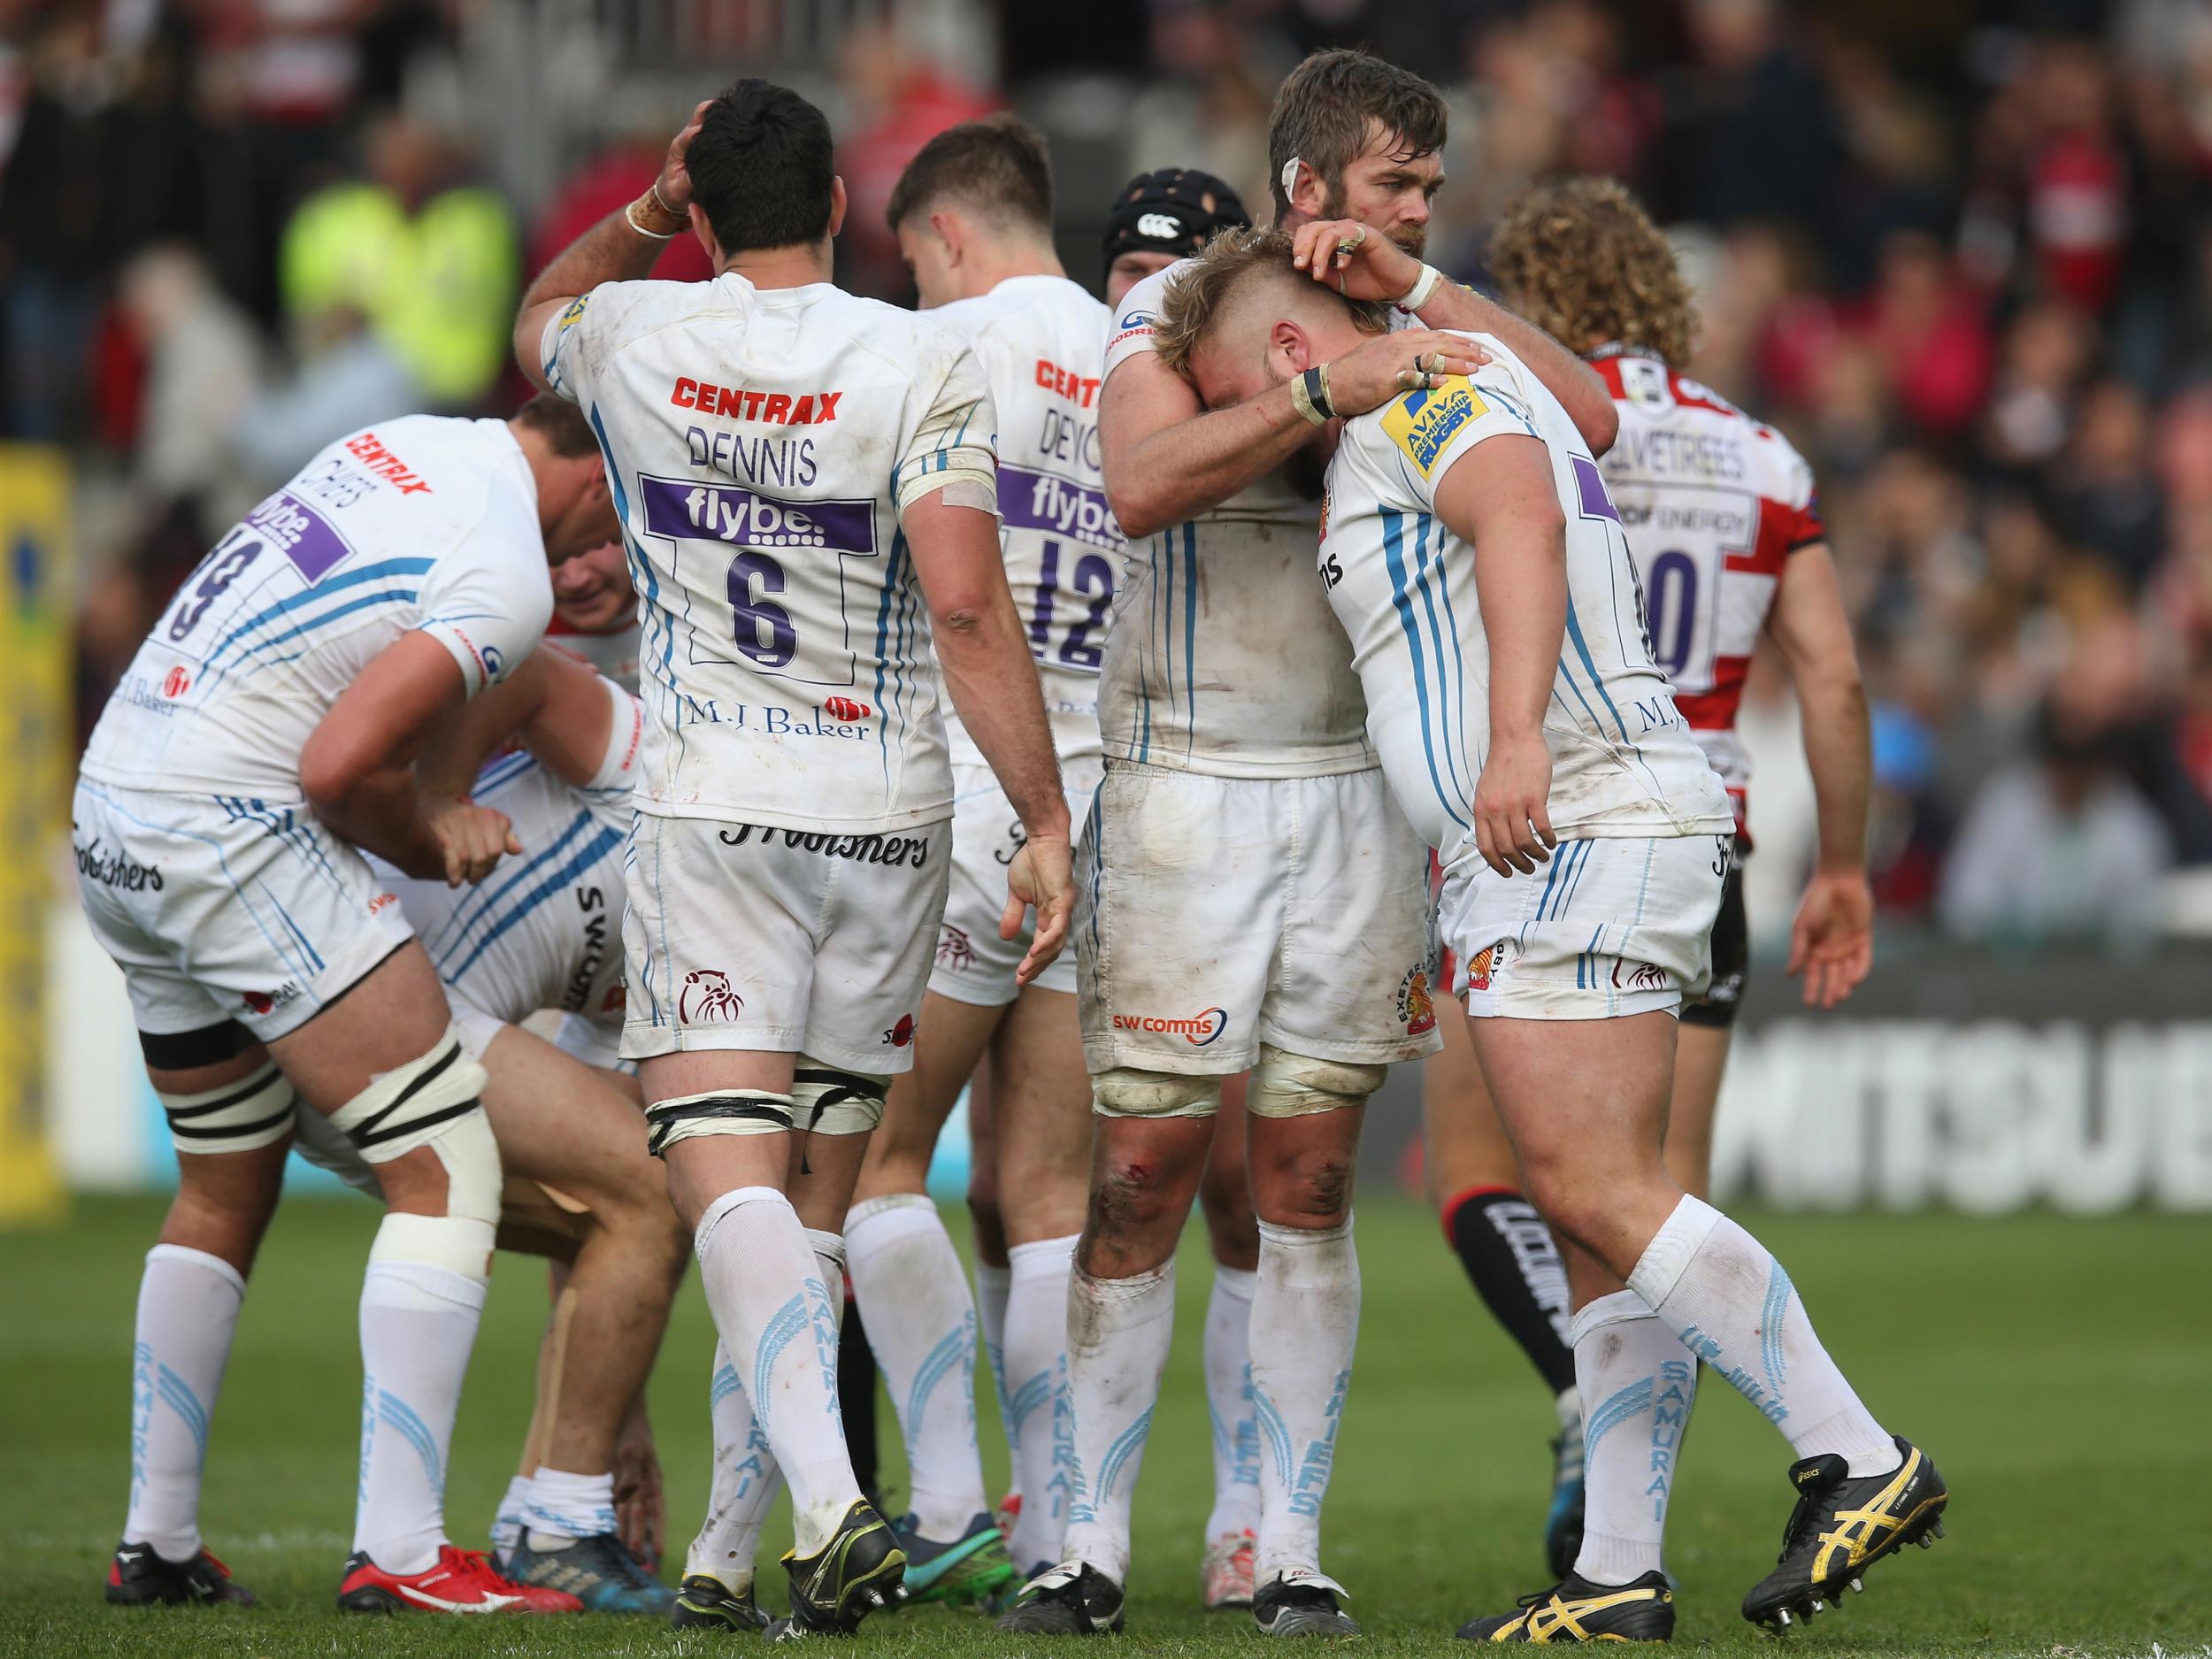 Exeter missed out on top spot after Wasps' win